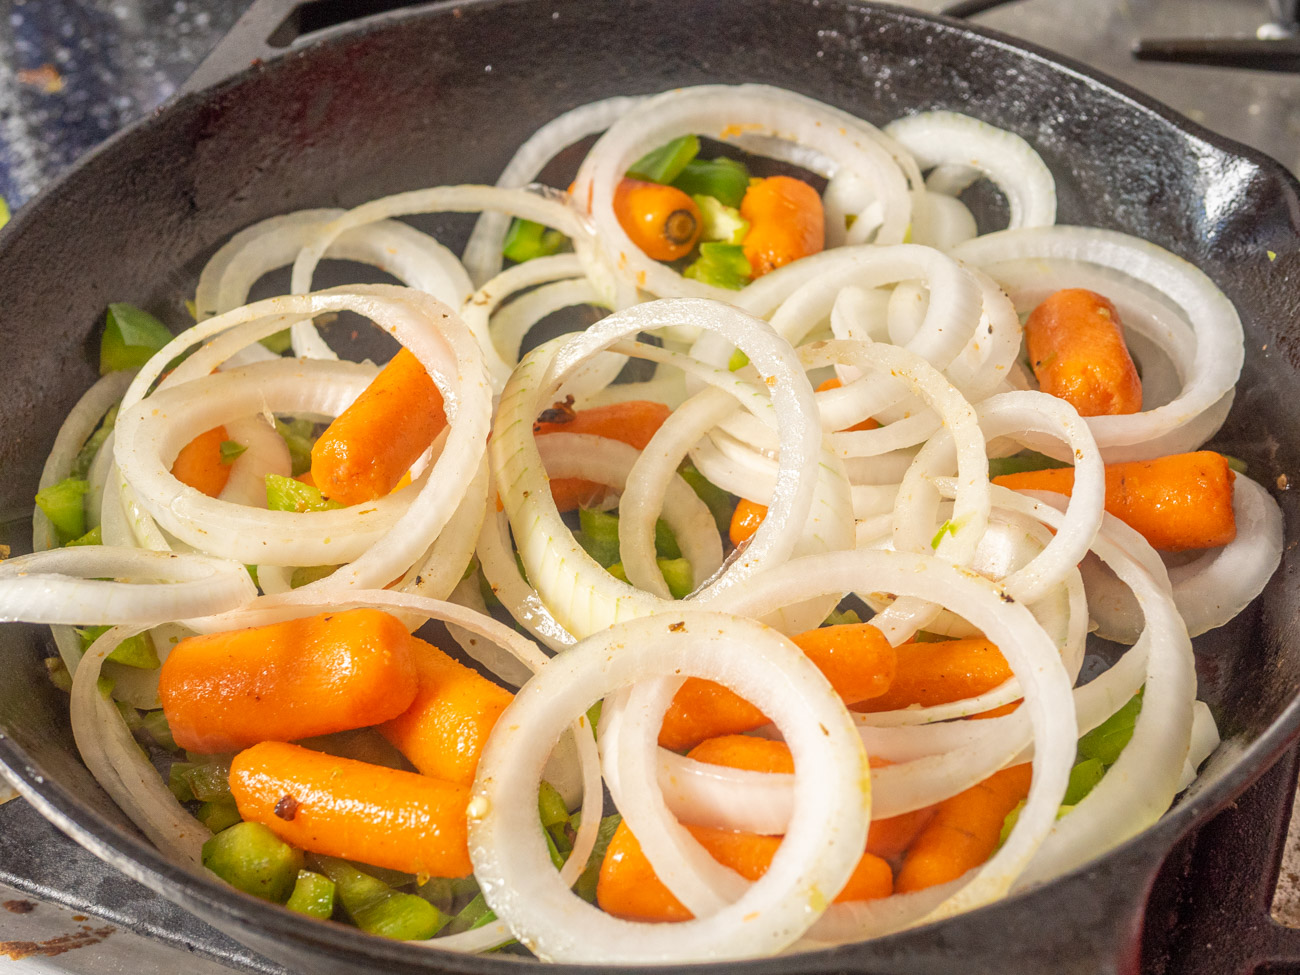 Cook remaining vegetables in the last tablespoon of olive oil for about 5-7 minutes. Add these to casserole dish.